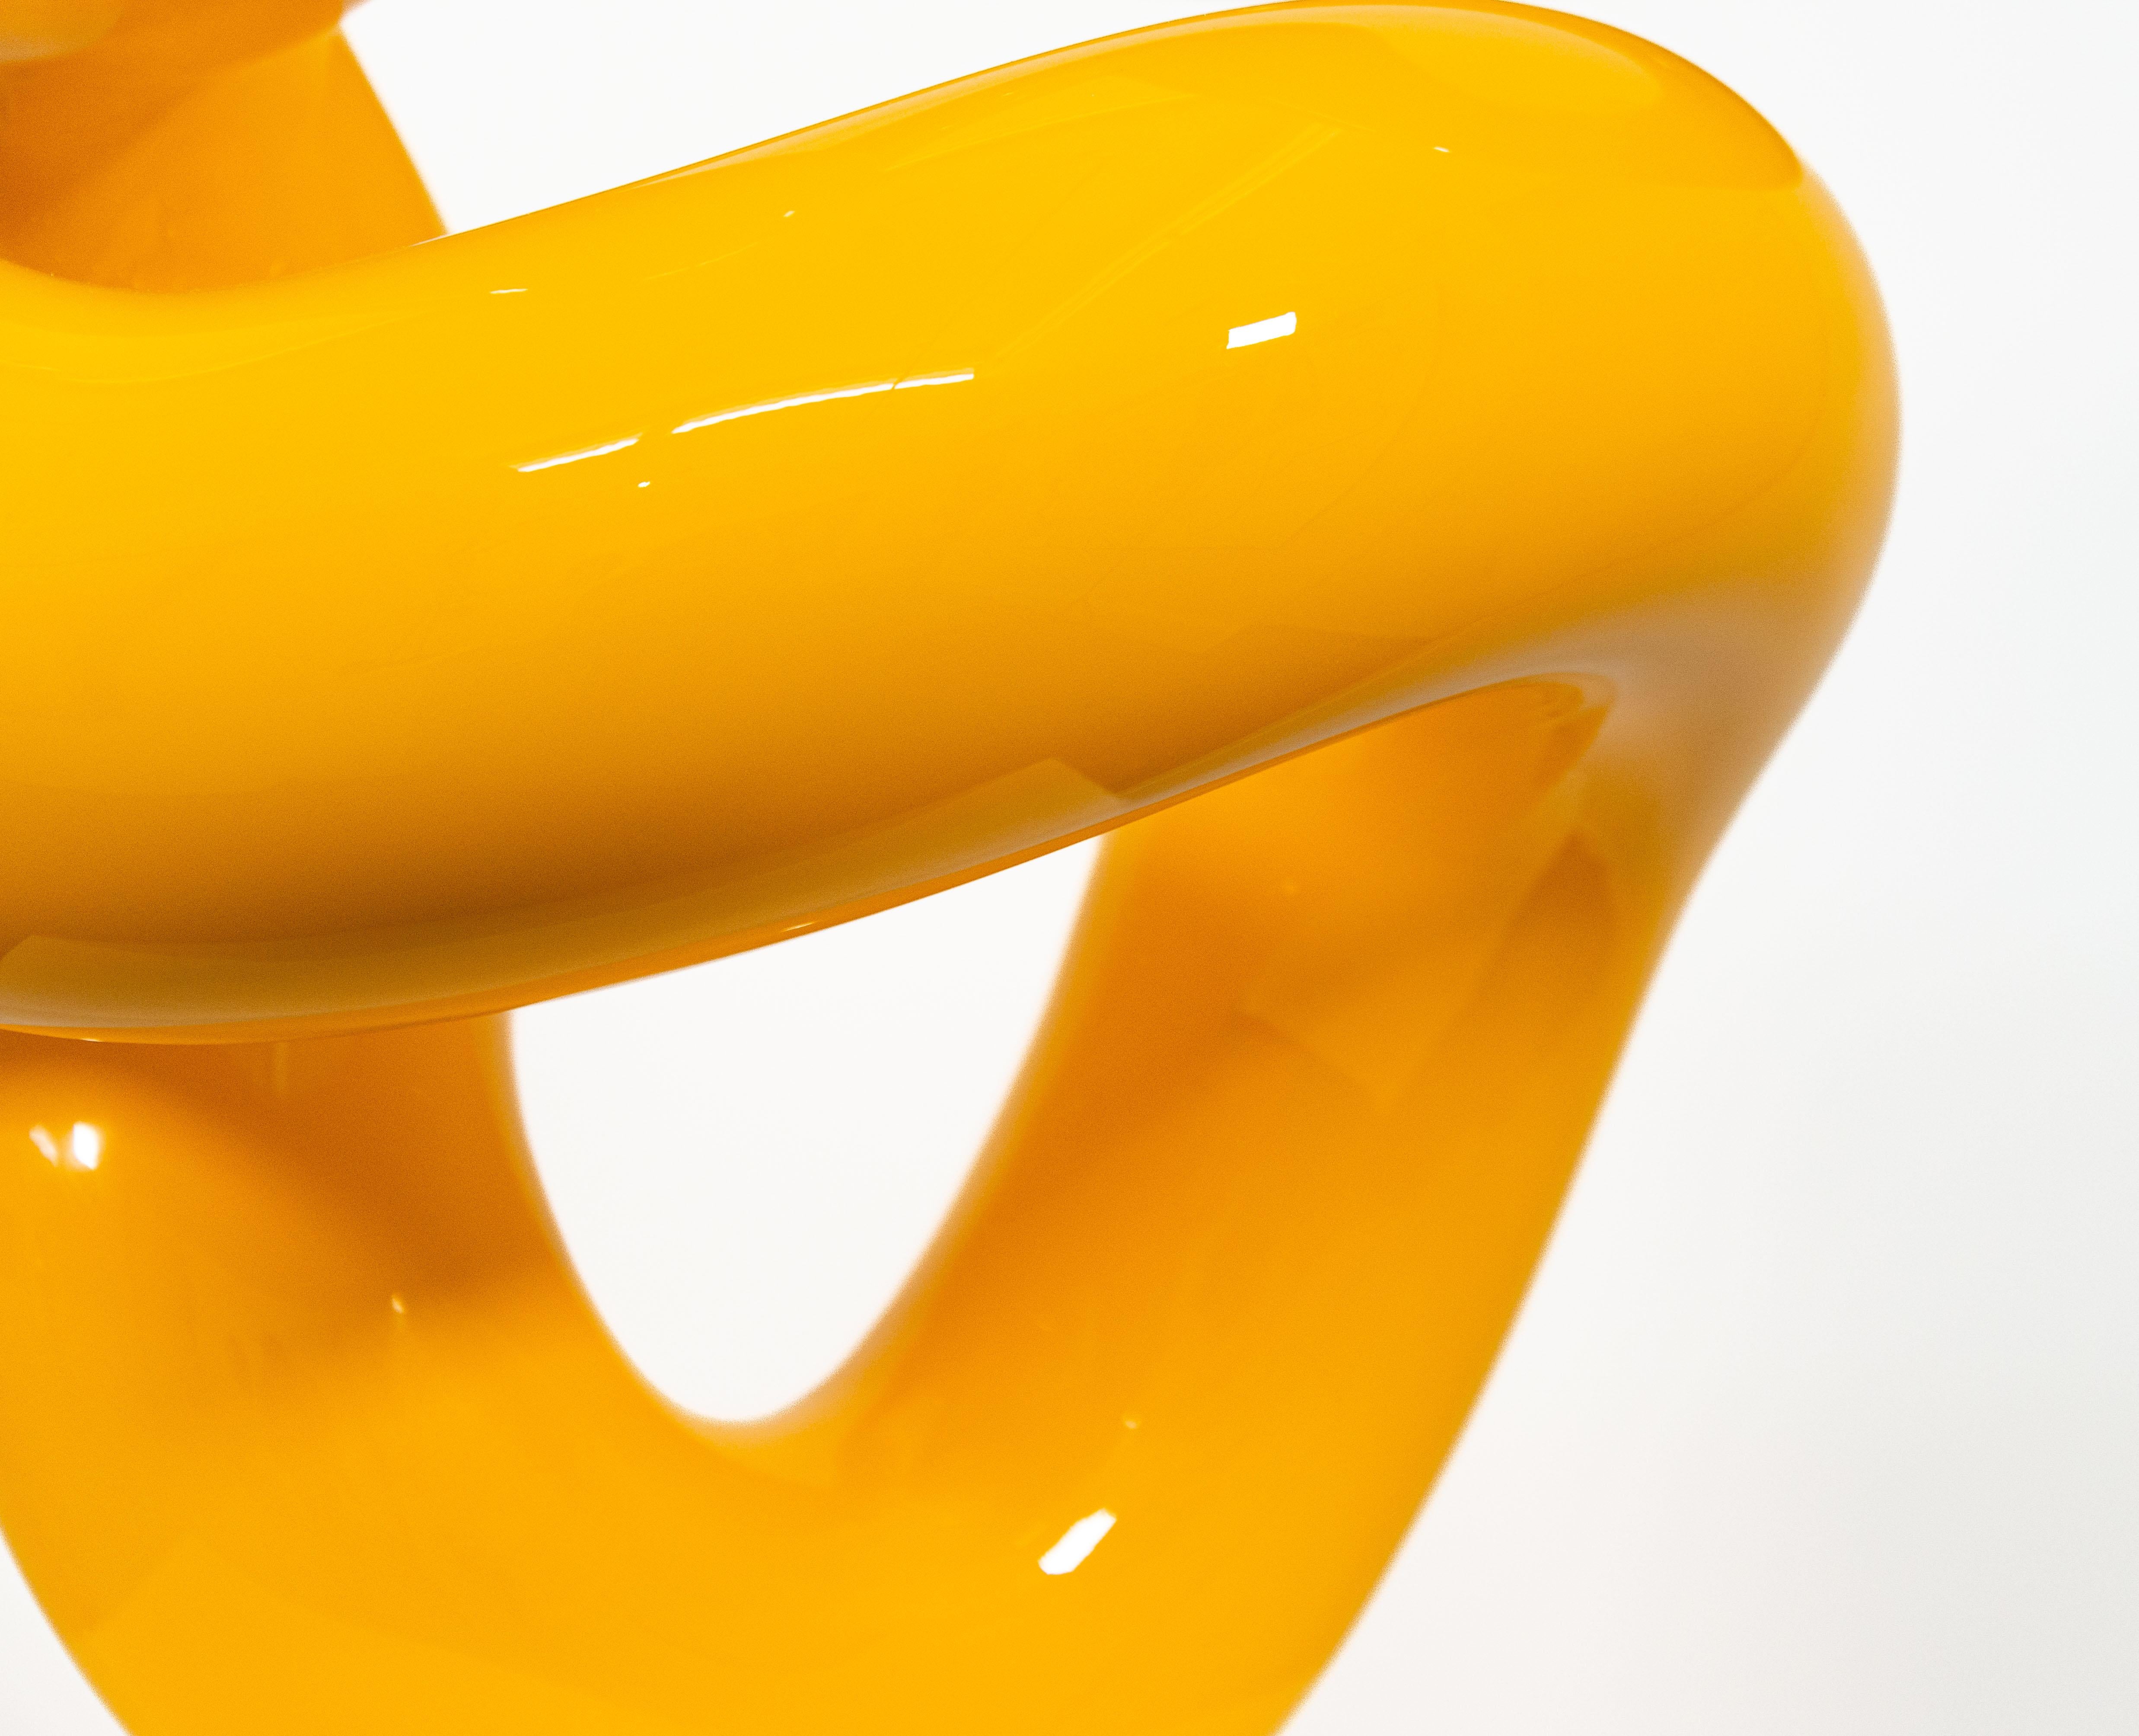 Yellow Circuit - polished, abstract, painted, stainless steel sculpture - Abstract Sculpture by Alexander Caldwell